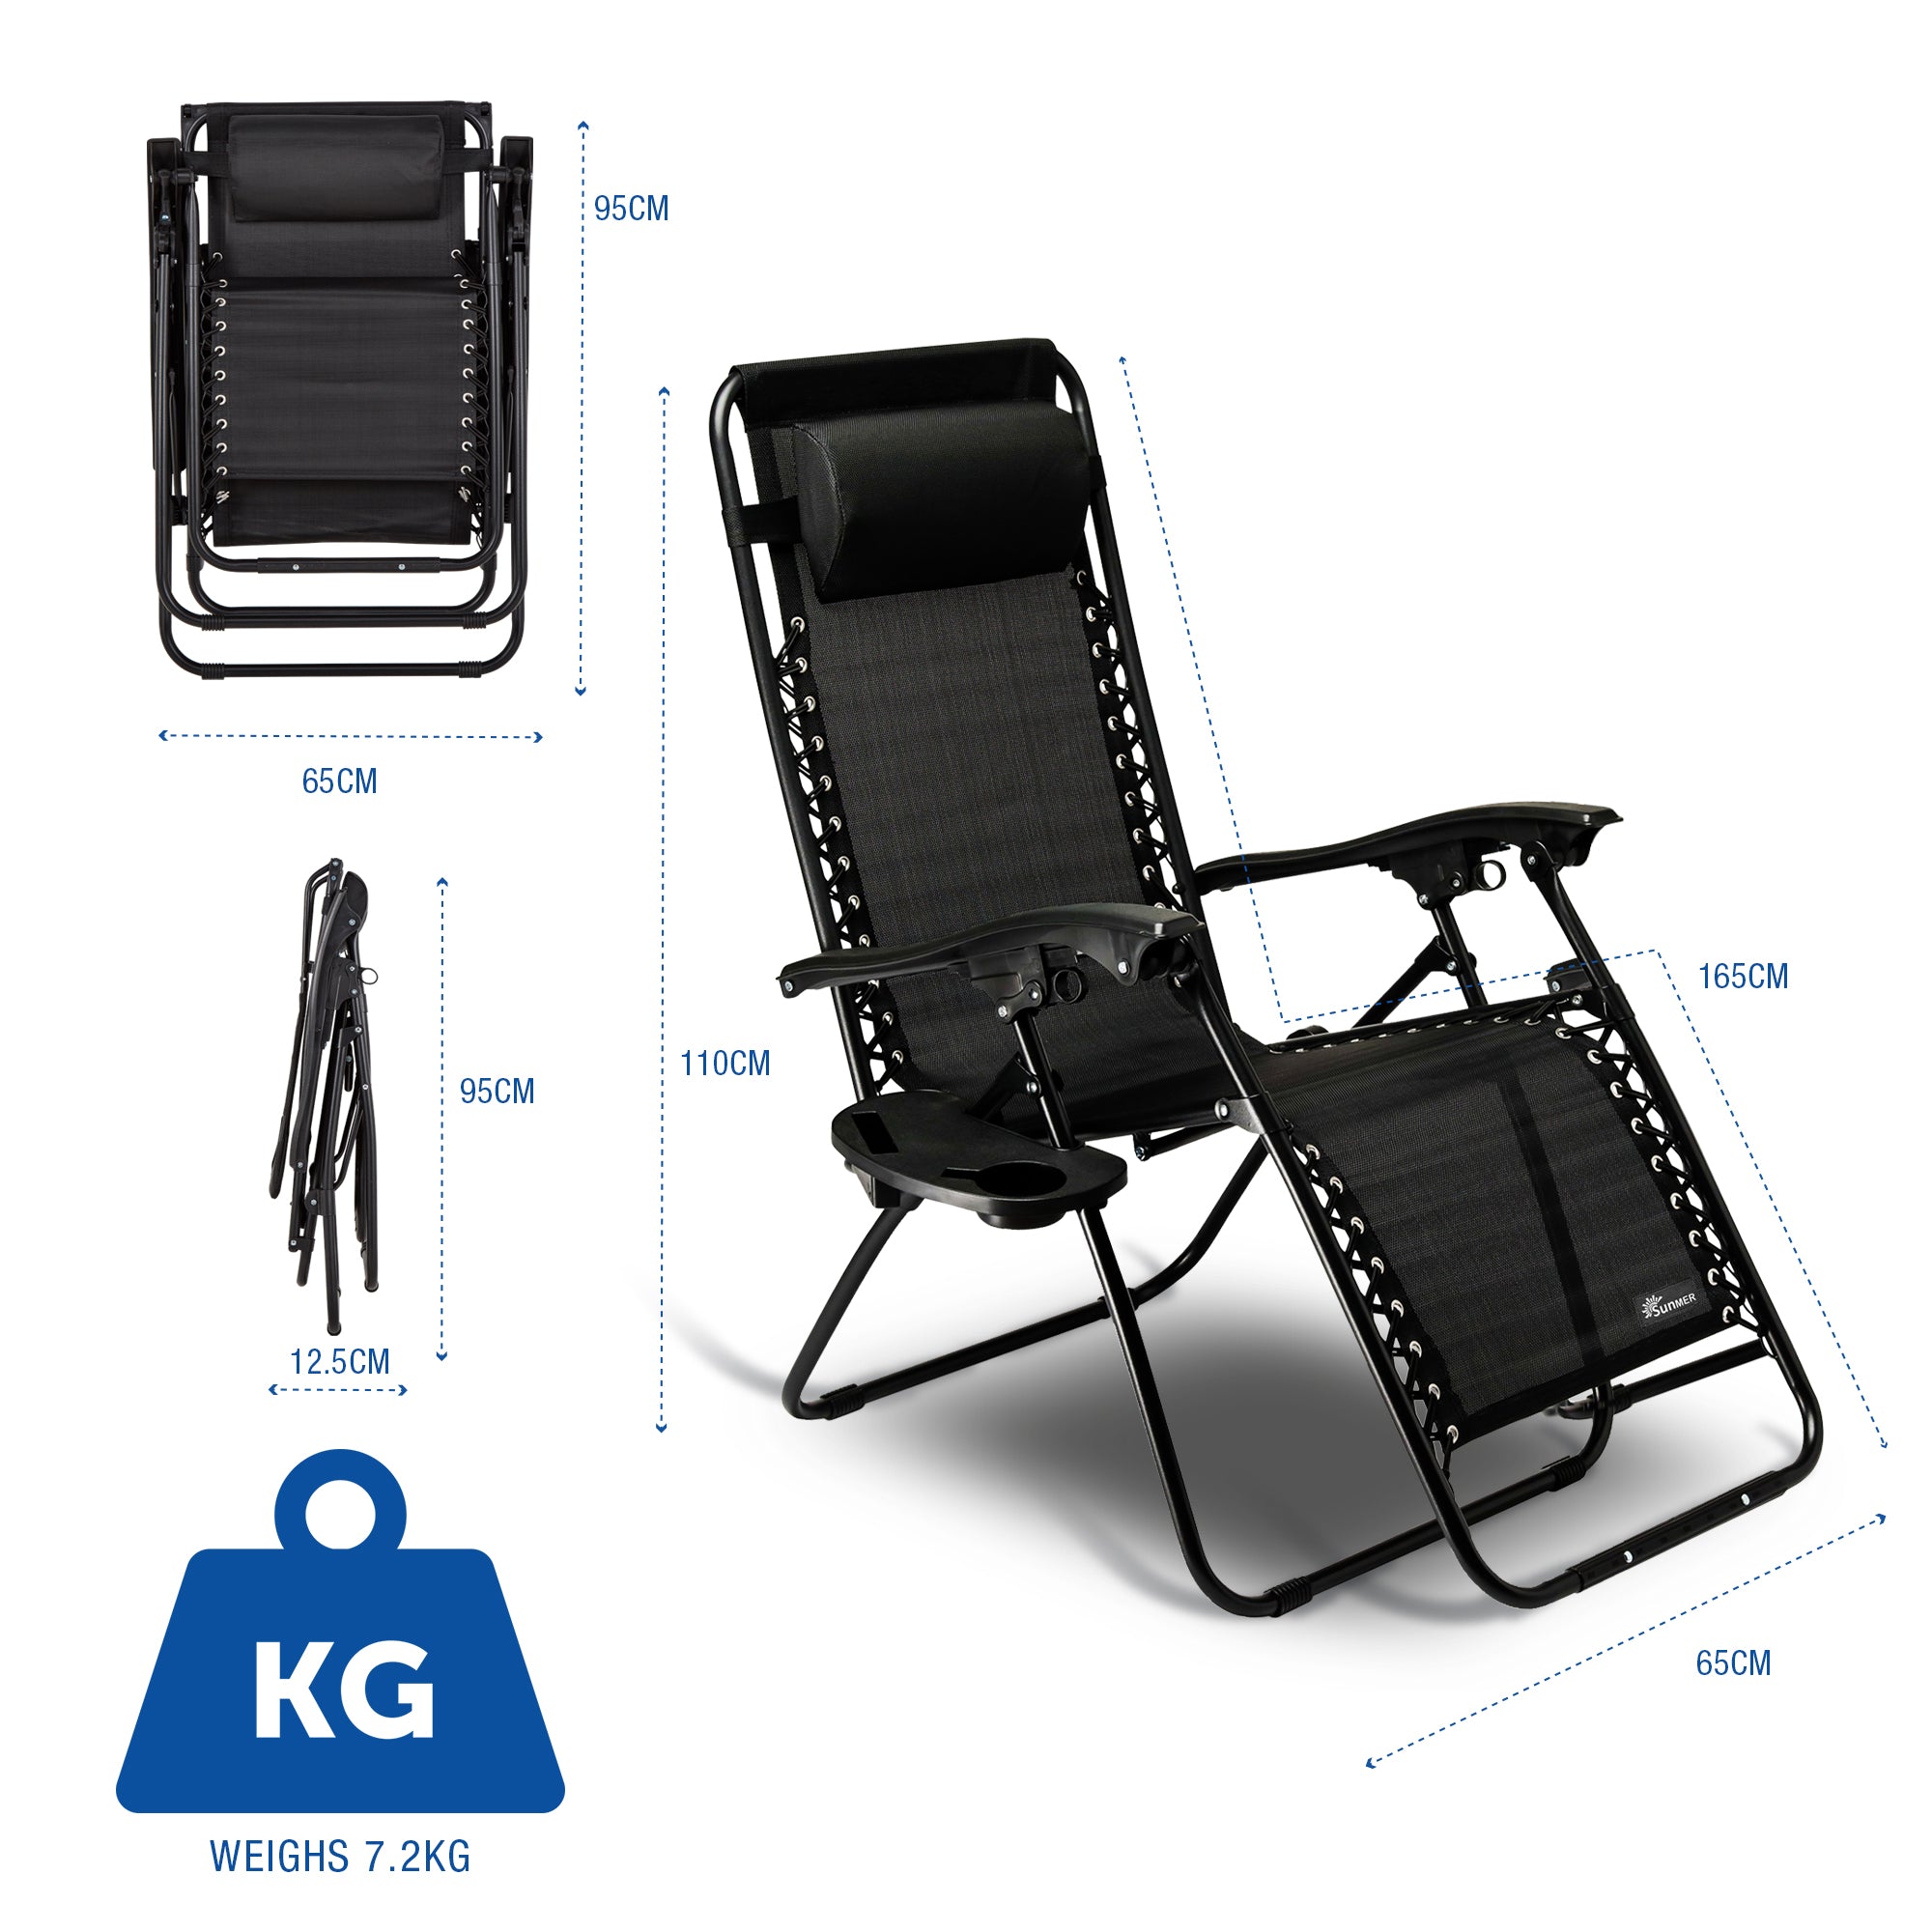 SUNMER Set of 2 Sun Lounger Garden Chairs With Cup And Phone Holder - Black